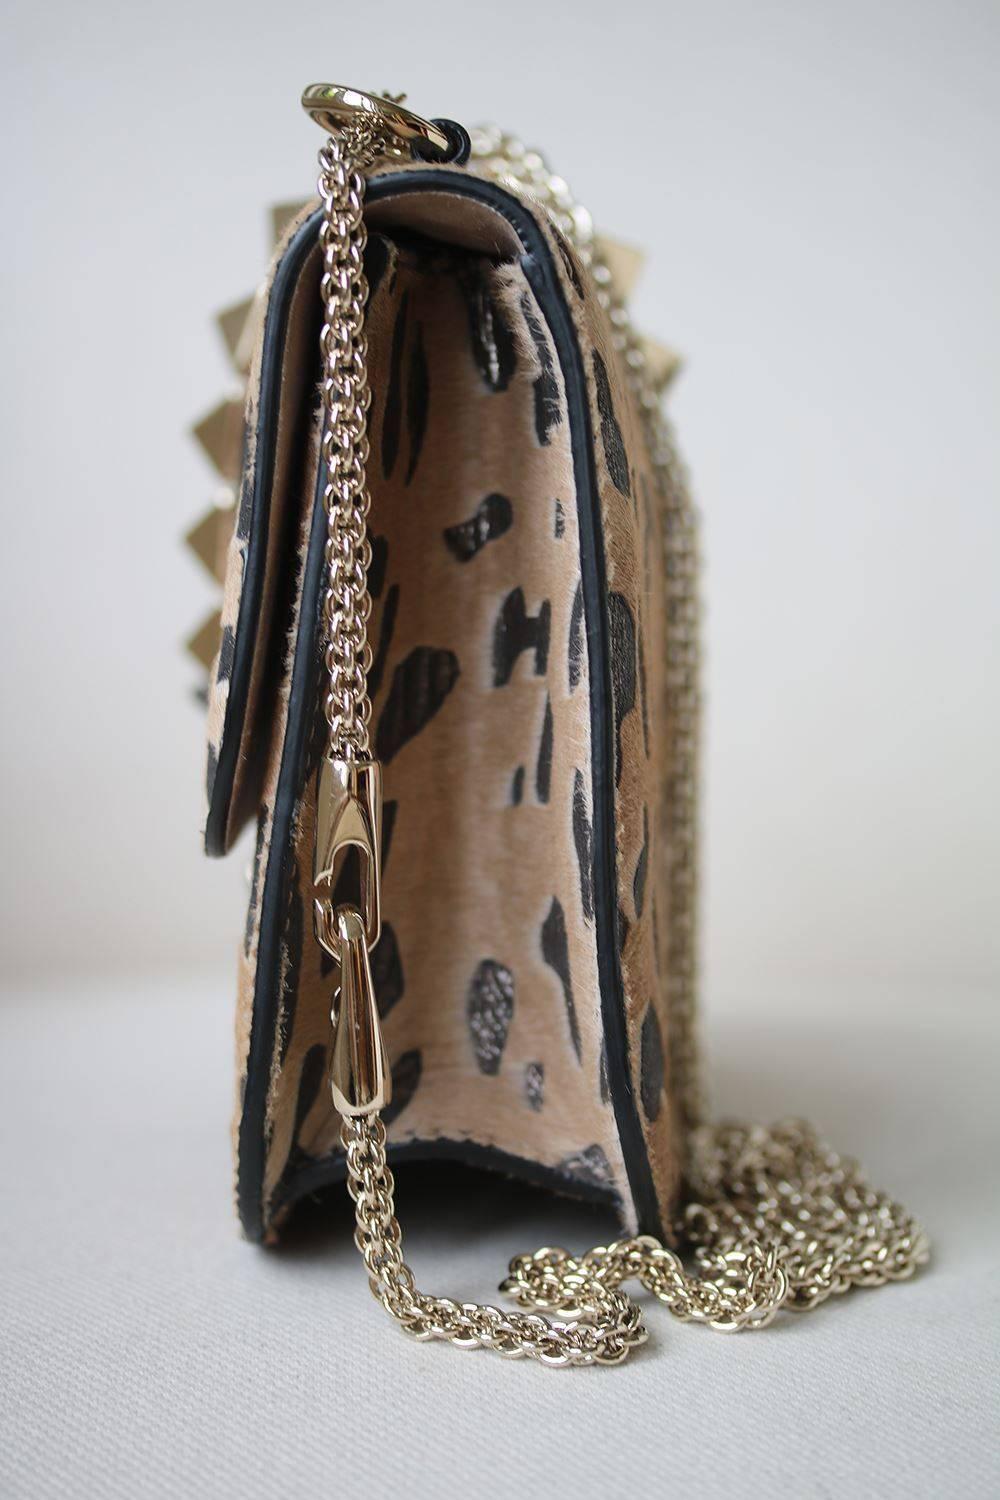 VALENTINO Calf Hair Leopard Print Medium Glam Lock Rockstud Flap Bag. This chic shoulder bag is crafted of calf hair and leather with a leopard print and pyramid studs over the top of the flap at the center of the bag. The bag features polished